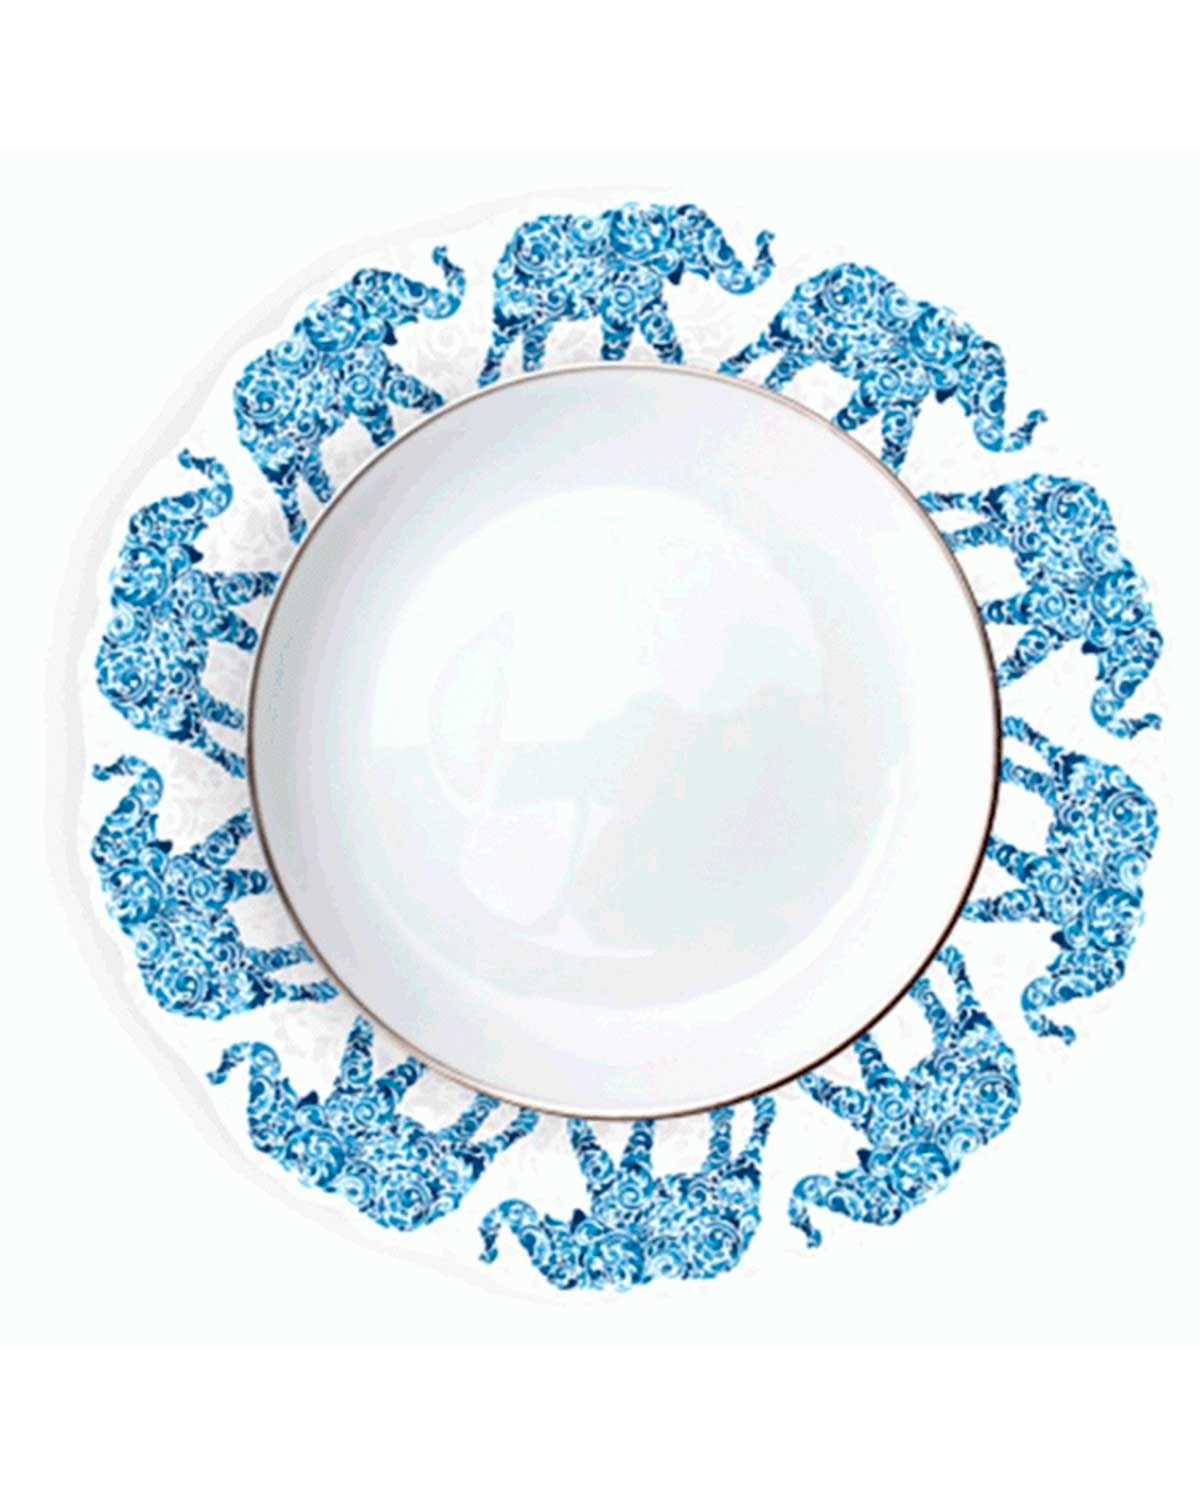 Elephant Patterned Round Placemat Set of 6 pieces-  White & Blue